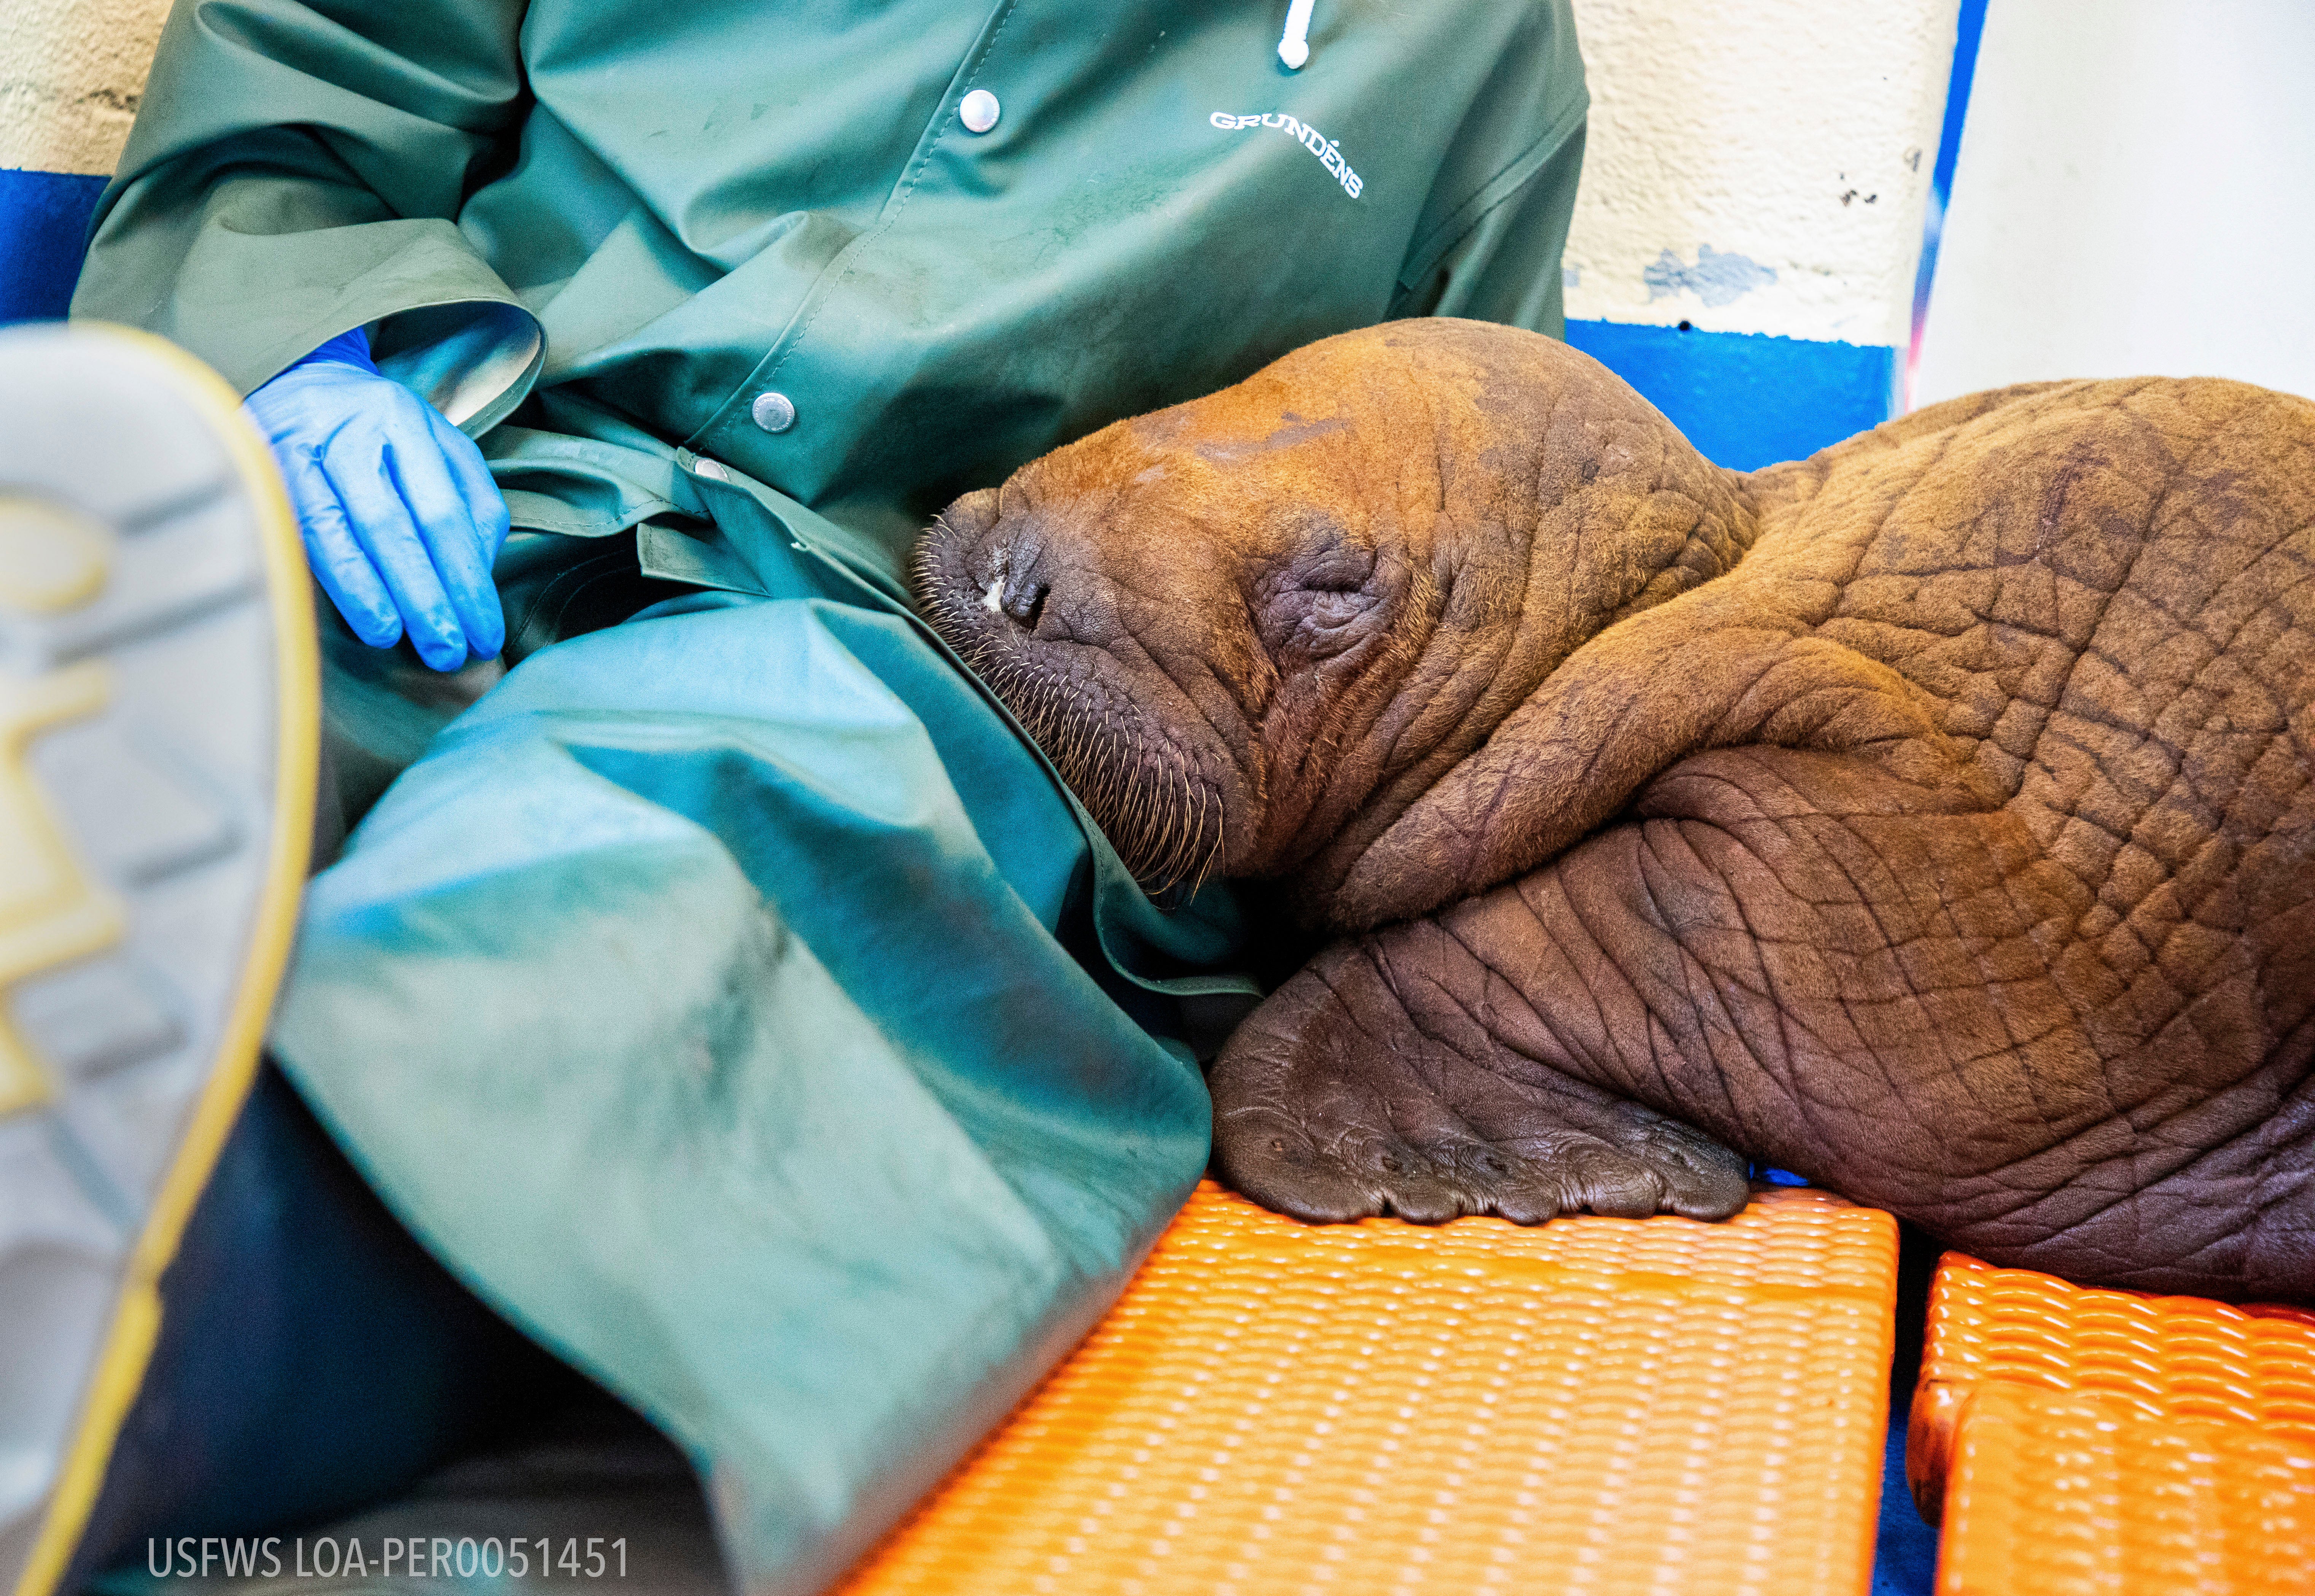 A Pacific walrus pup rests his head on the lap of a staff member after being admitted to the centre's Wildlife Response Program.